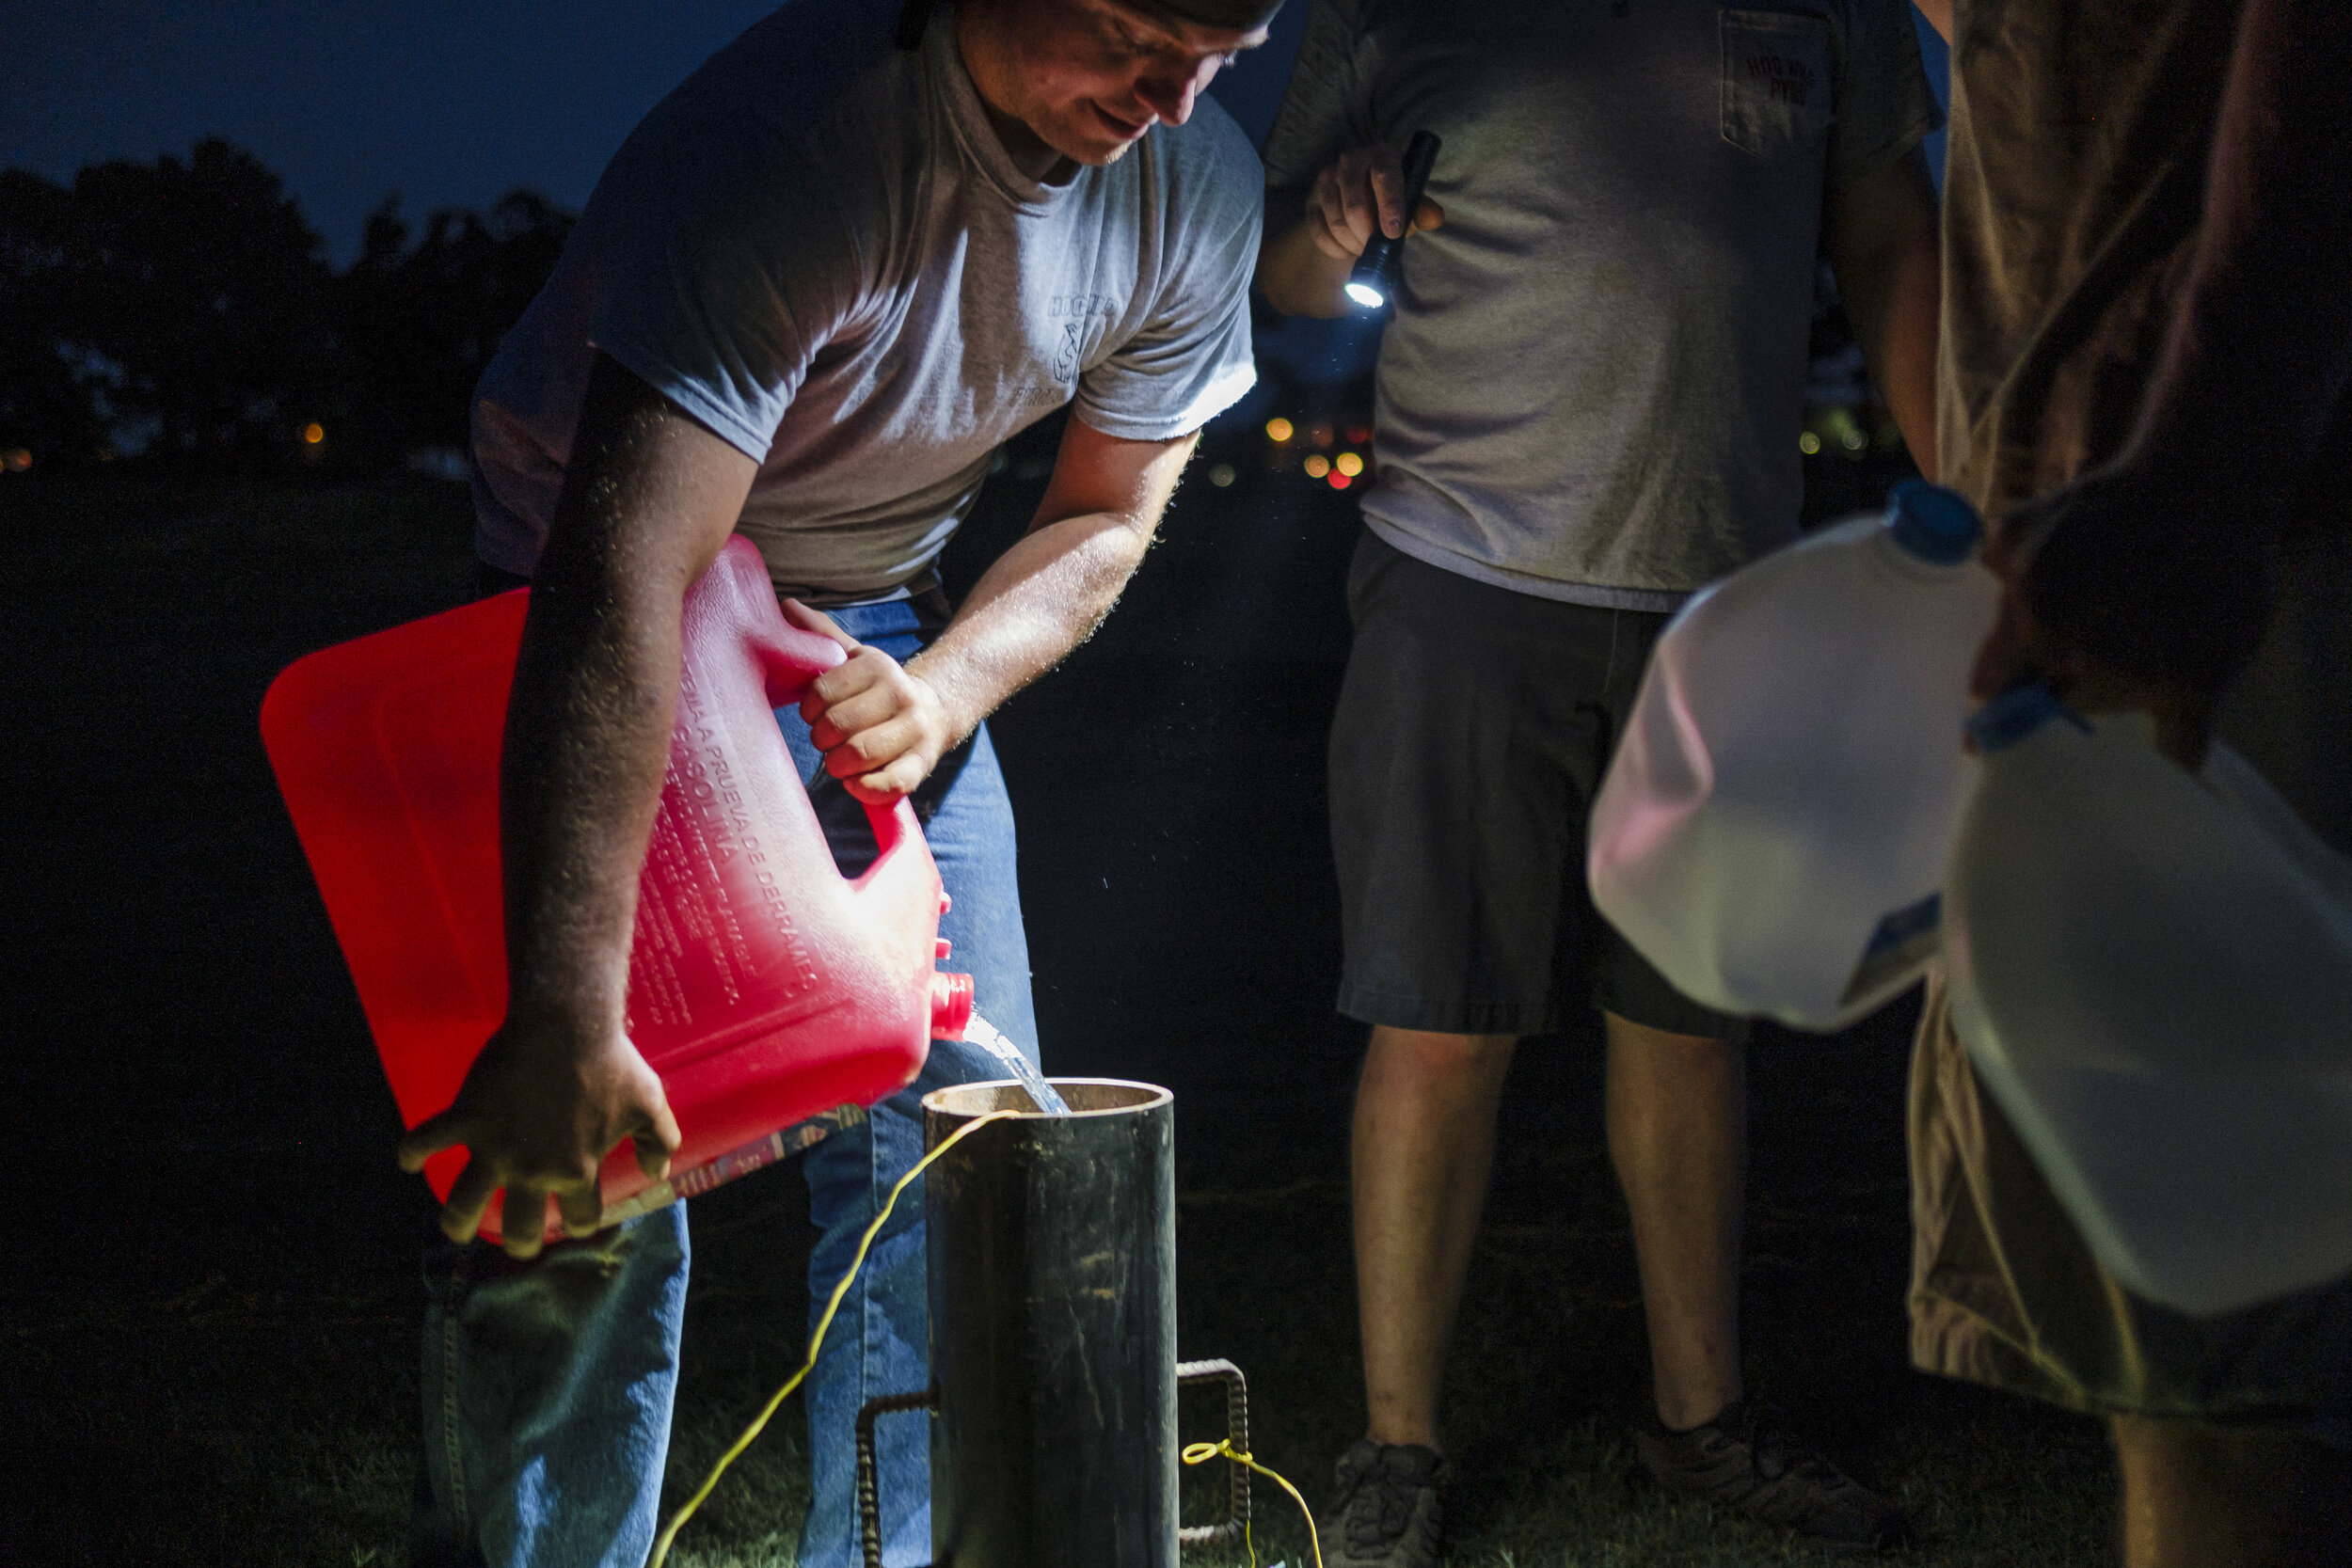  Members of the team fill a mortar with gasoline, which will produce a massive explosion for the Gran Finale.  